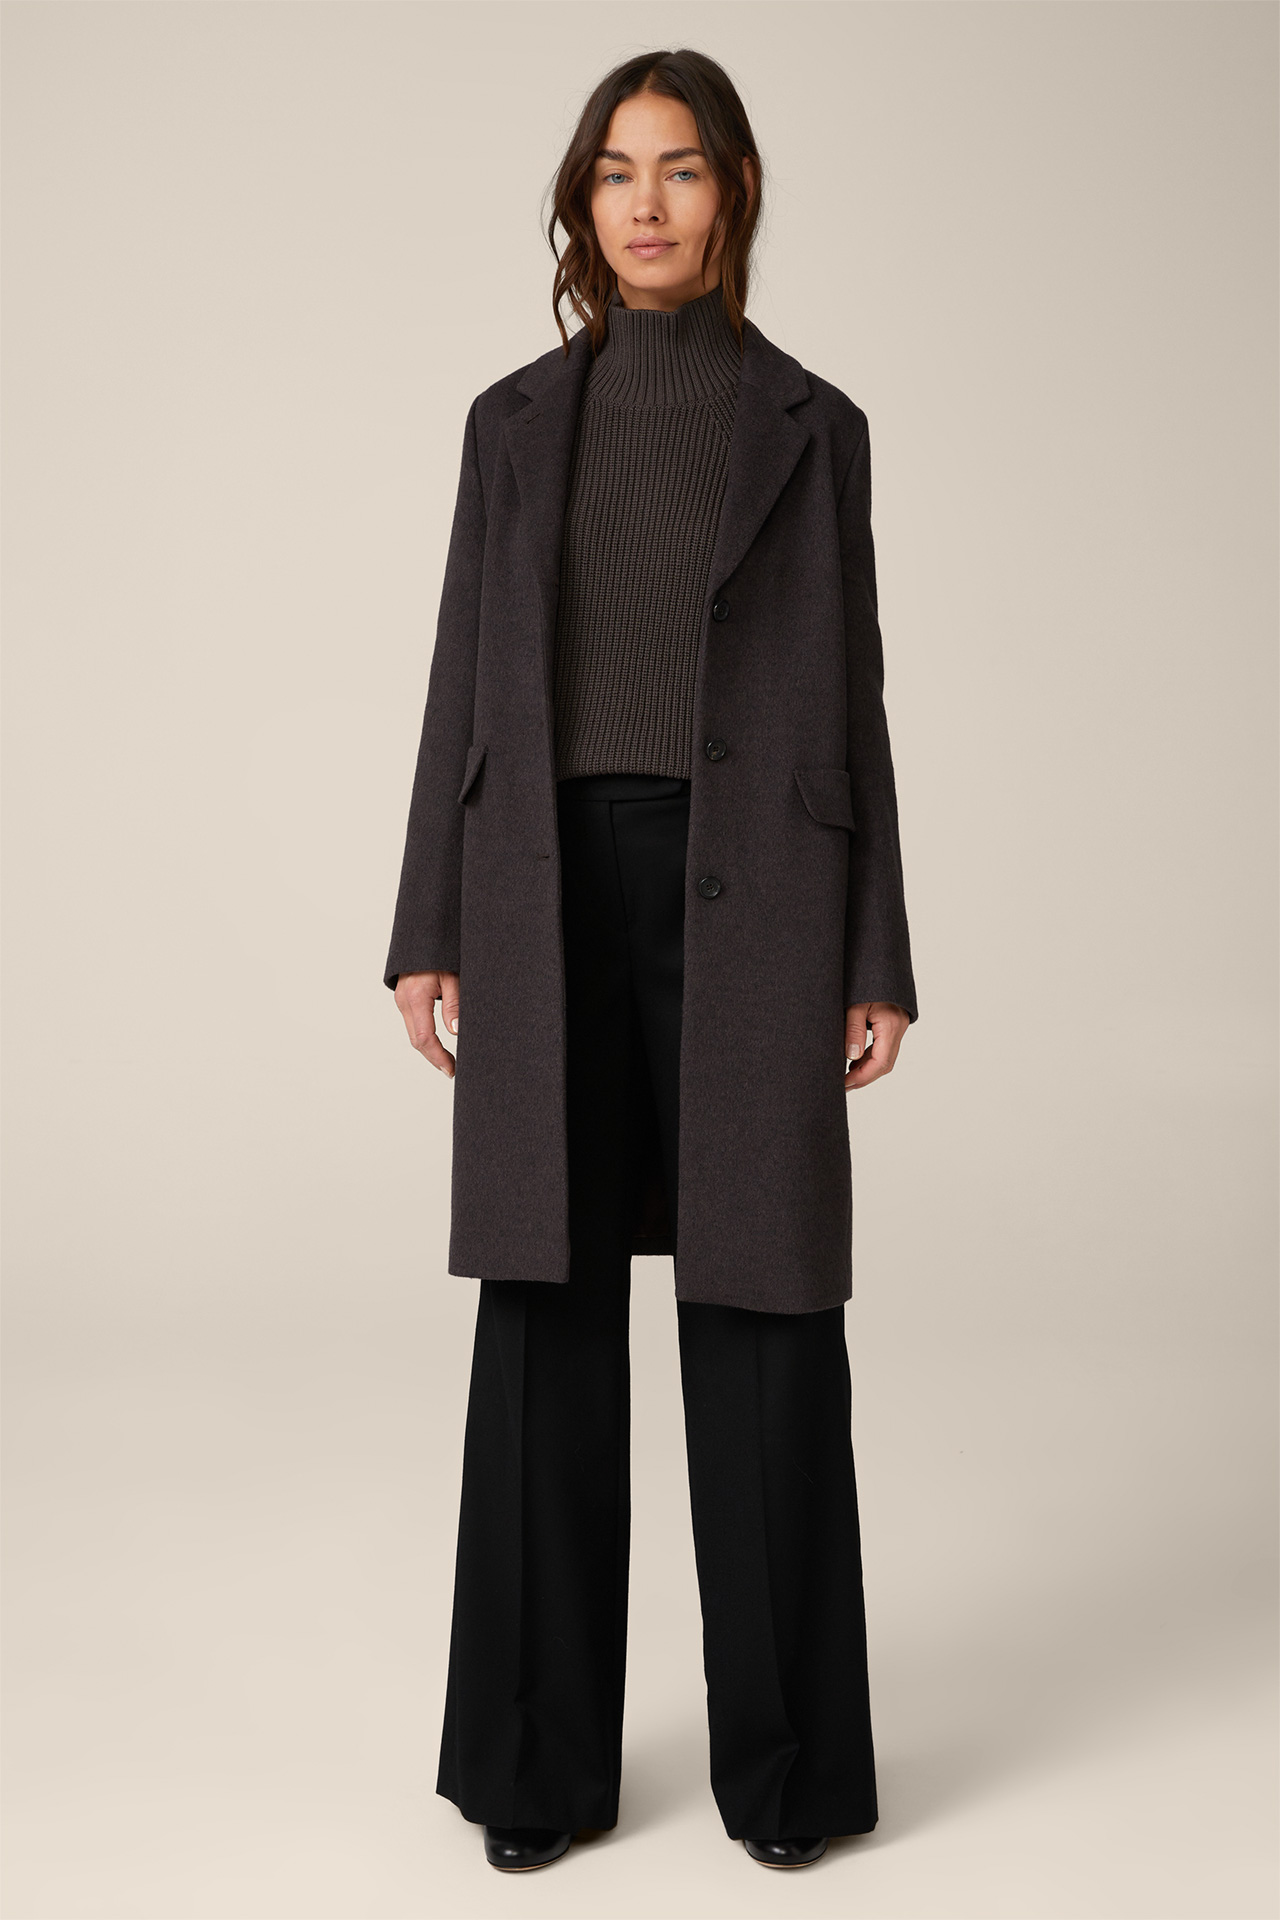 Virgin Wool Egg-shaped Coat with Cashmere in Anthracite Marl